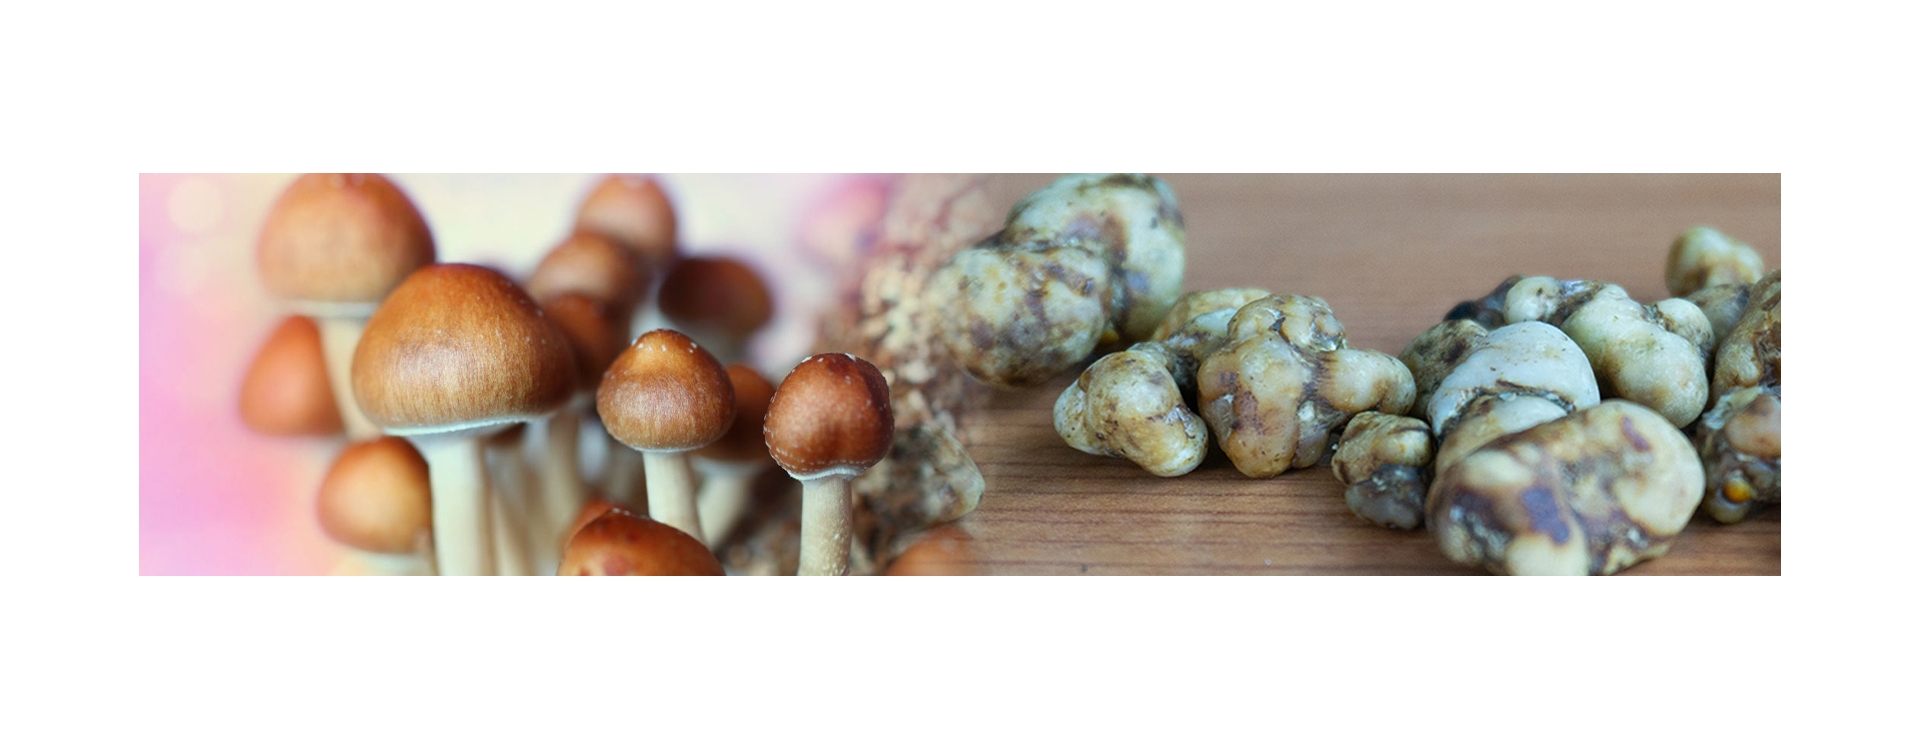 The History and Cultural Use of Magic Mushrooms and Truffles